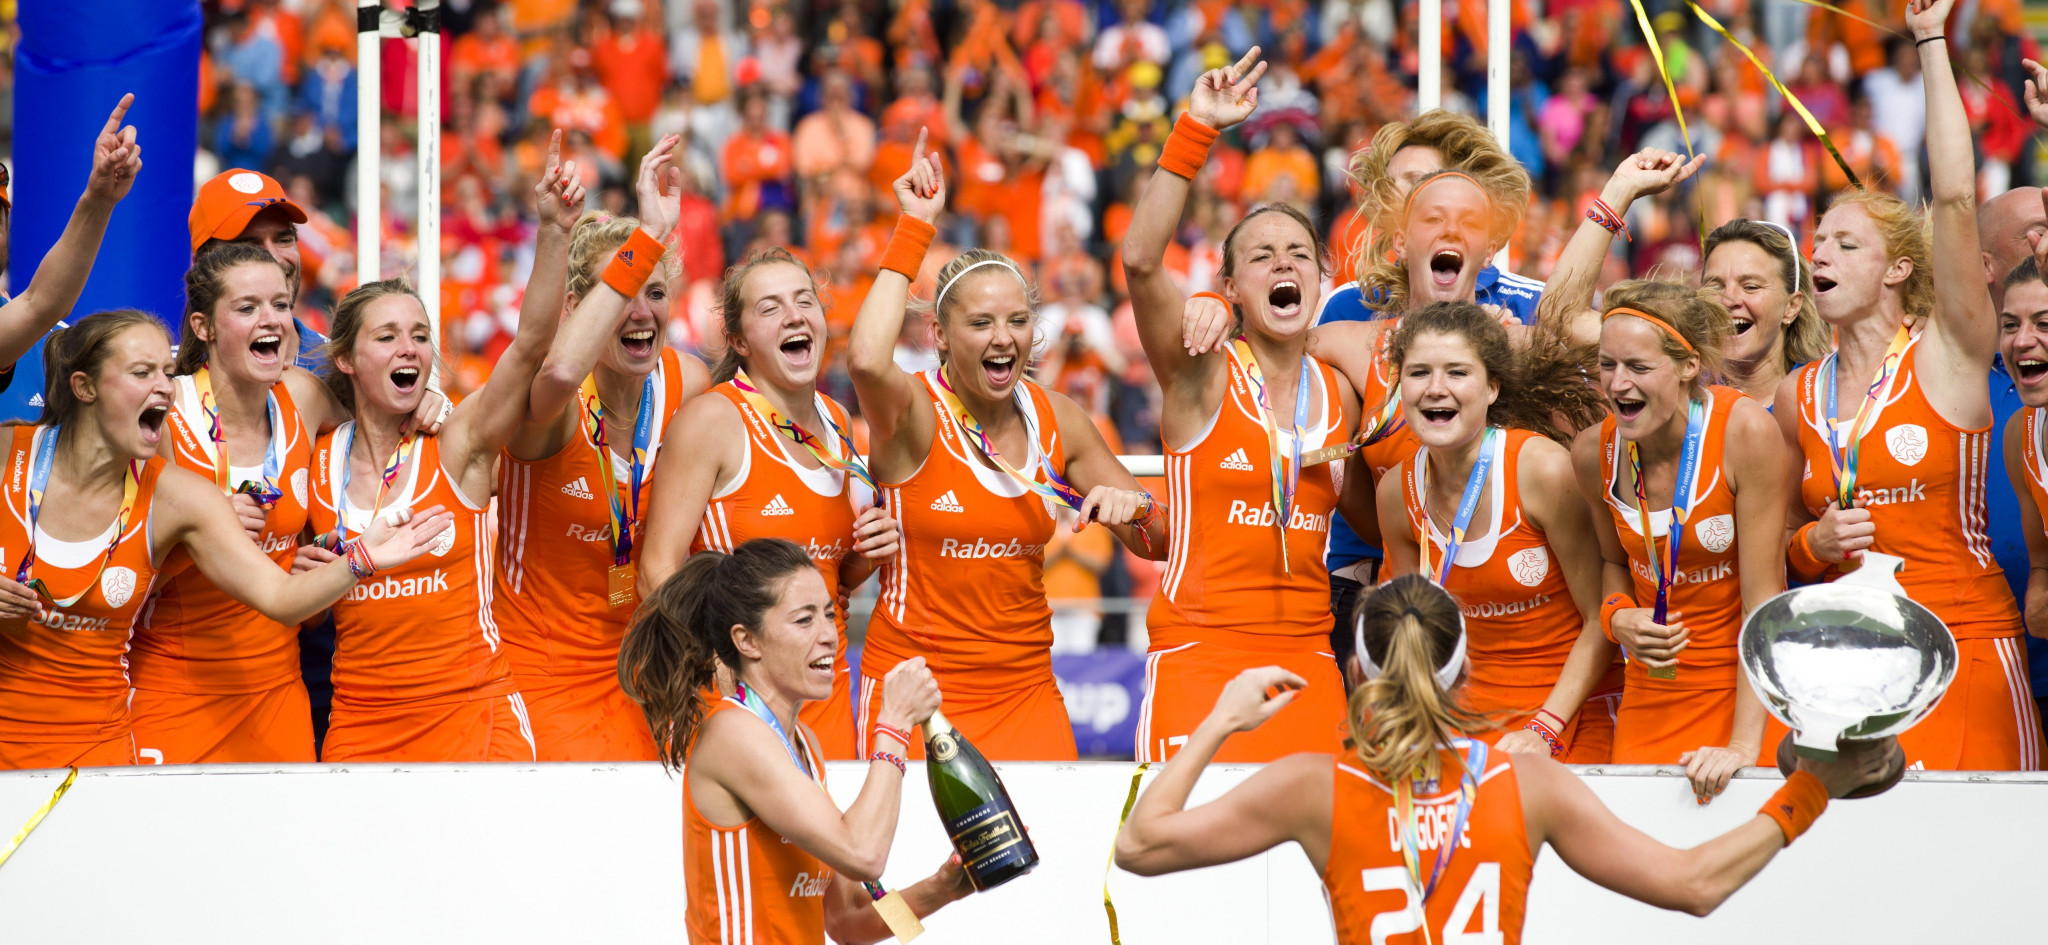 The Netherlands will be hoping to retain their World Cup title in London next year ©Getty Images